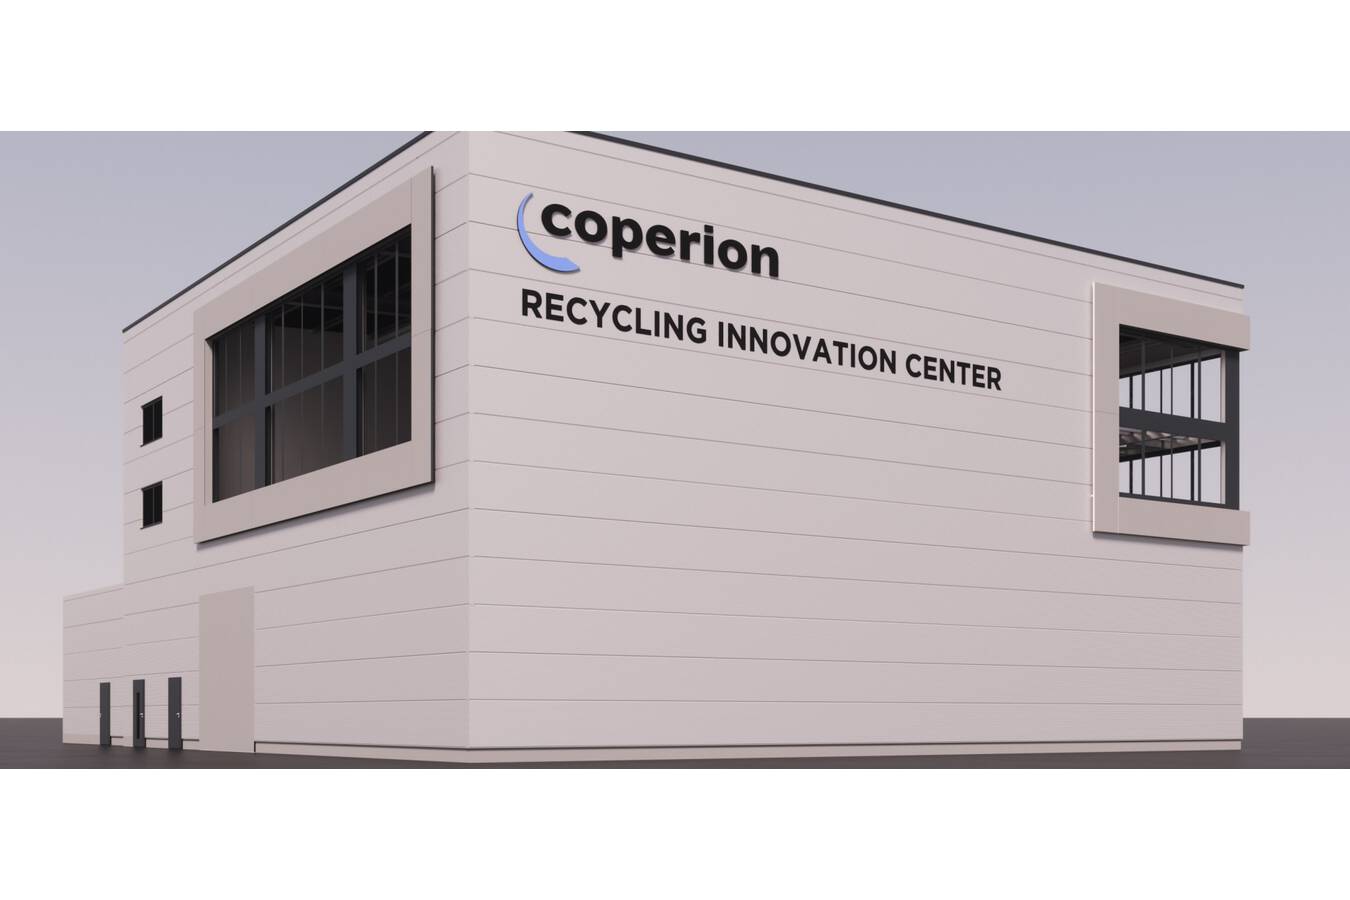 Coperion Recycling Innovation Center: state-of-the-art test laboratory for plastics recycling applications